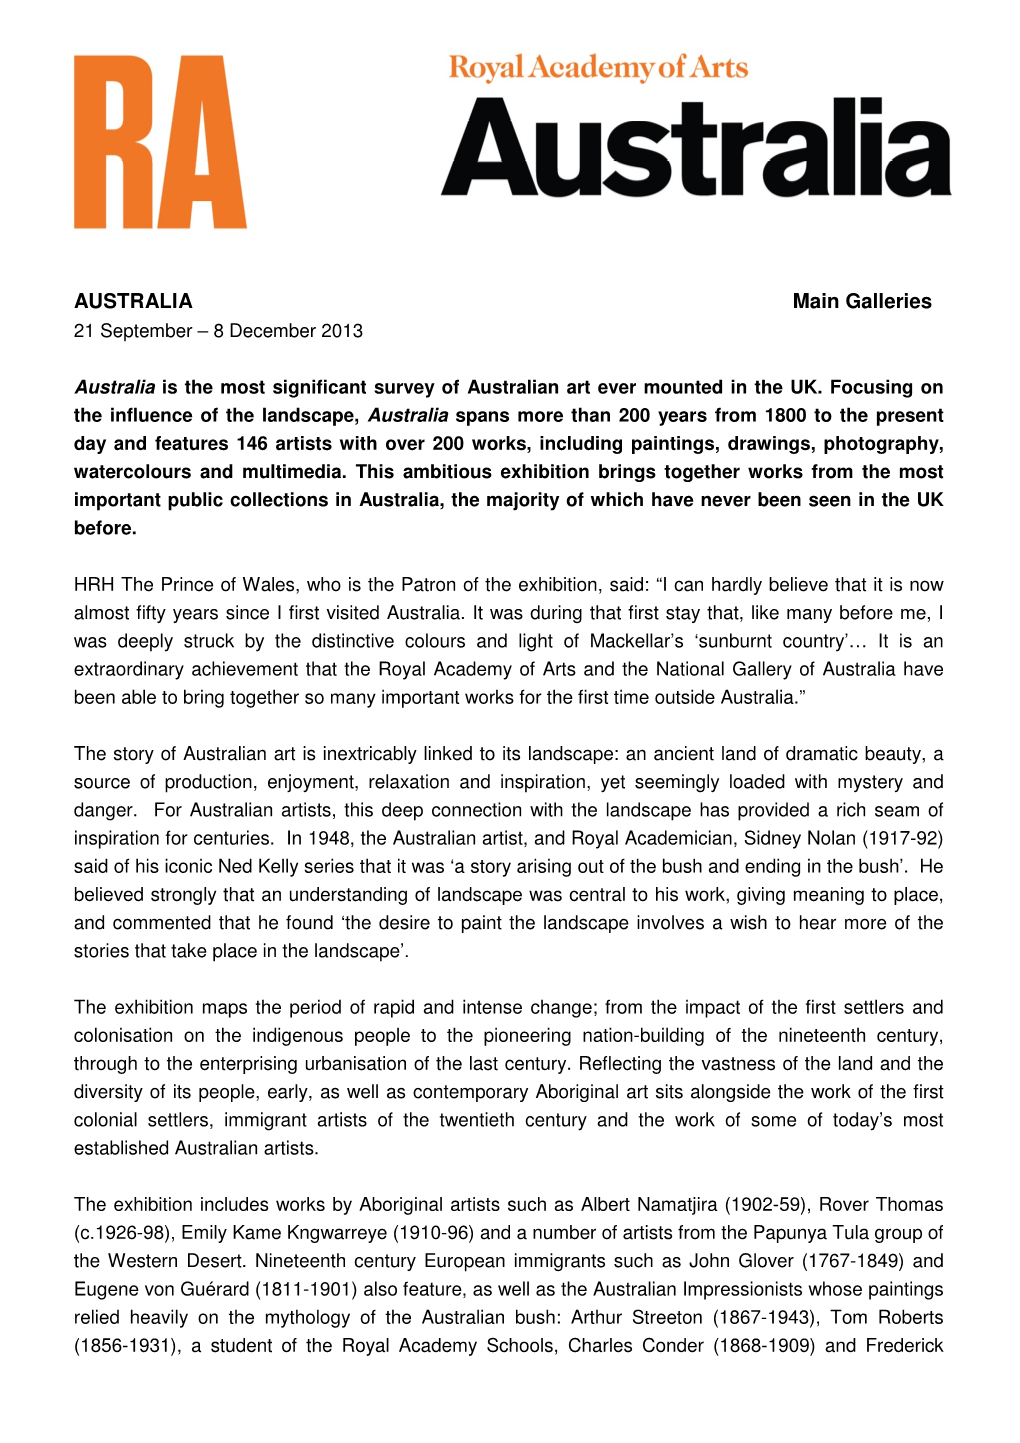 Royal Academy of Art Press Release